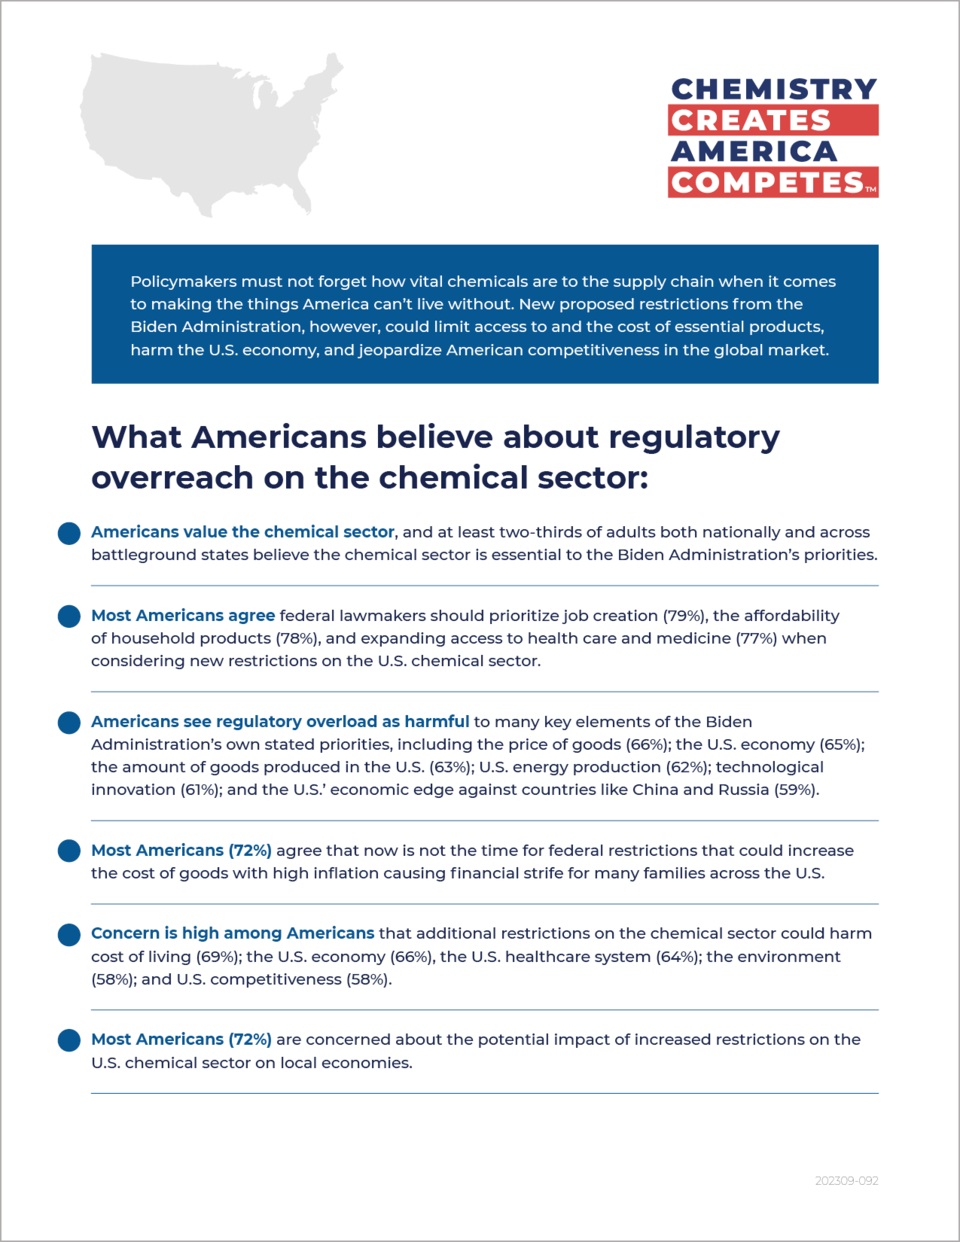 What Americans Believe About Regulatory Overreach on Chemical Sector - Fact Sheet